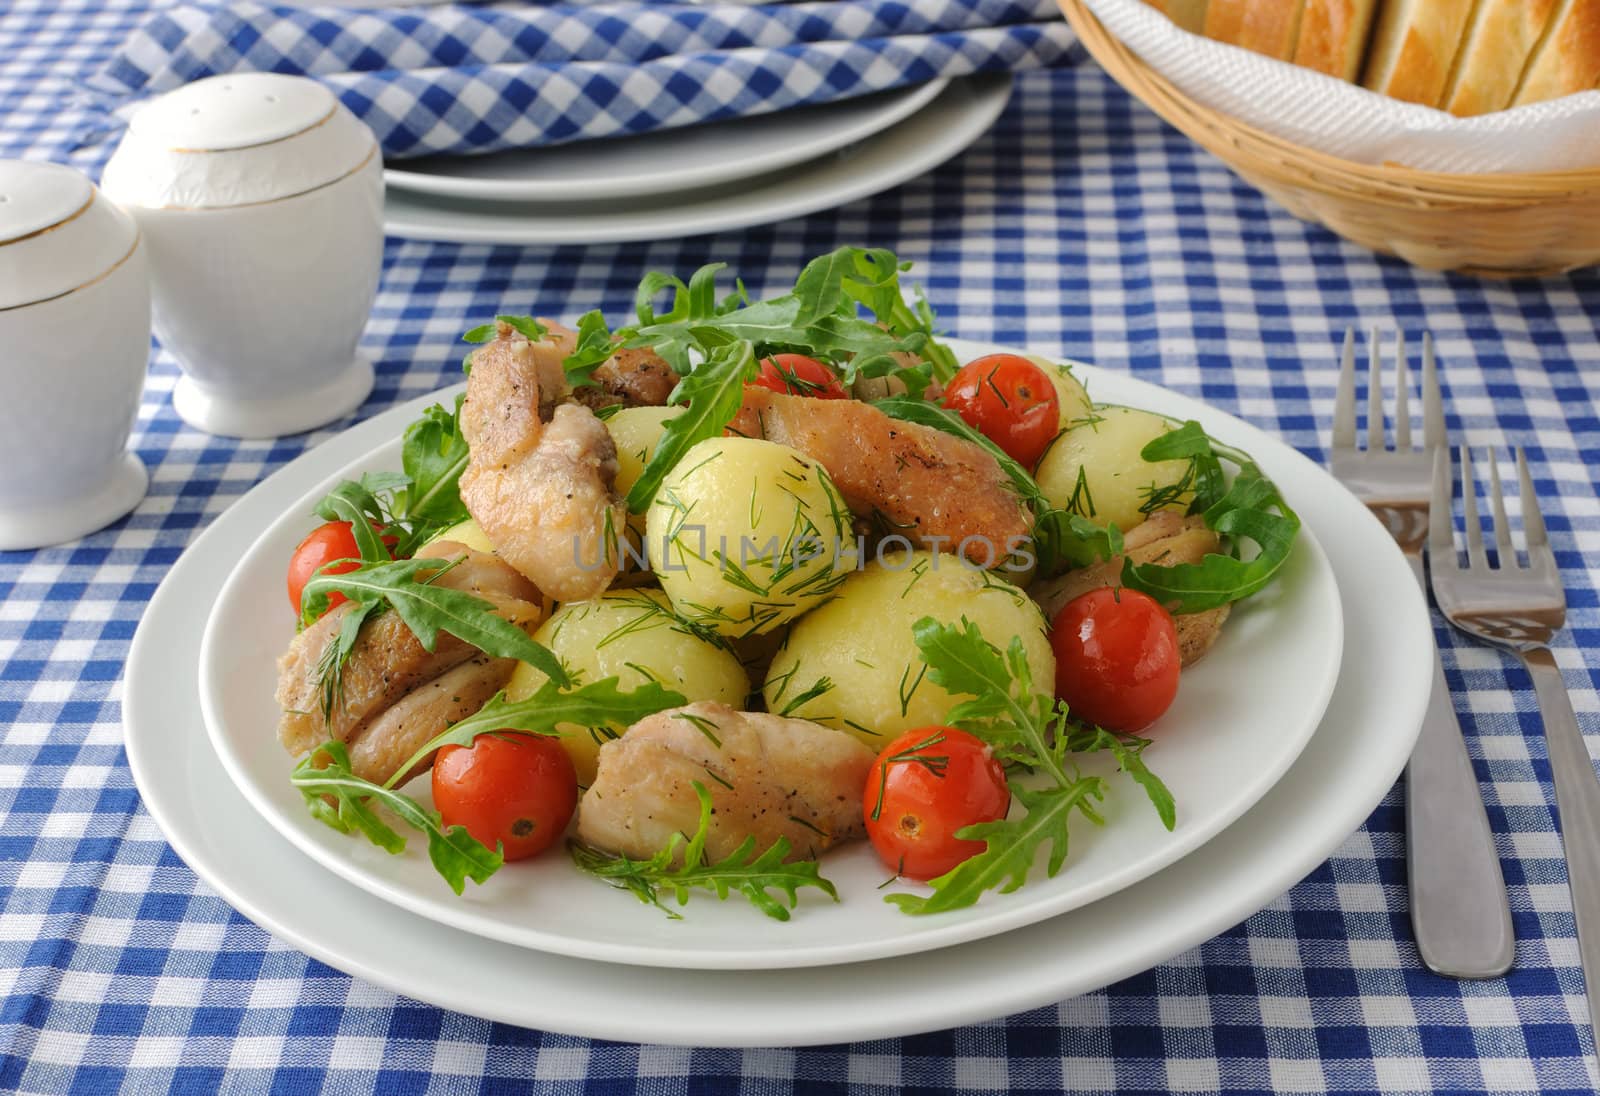 Boiled potatoes with chicken, arugula and tomato